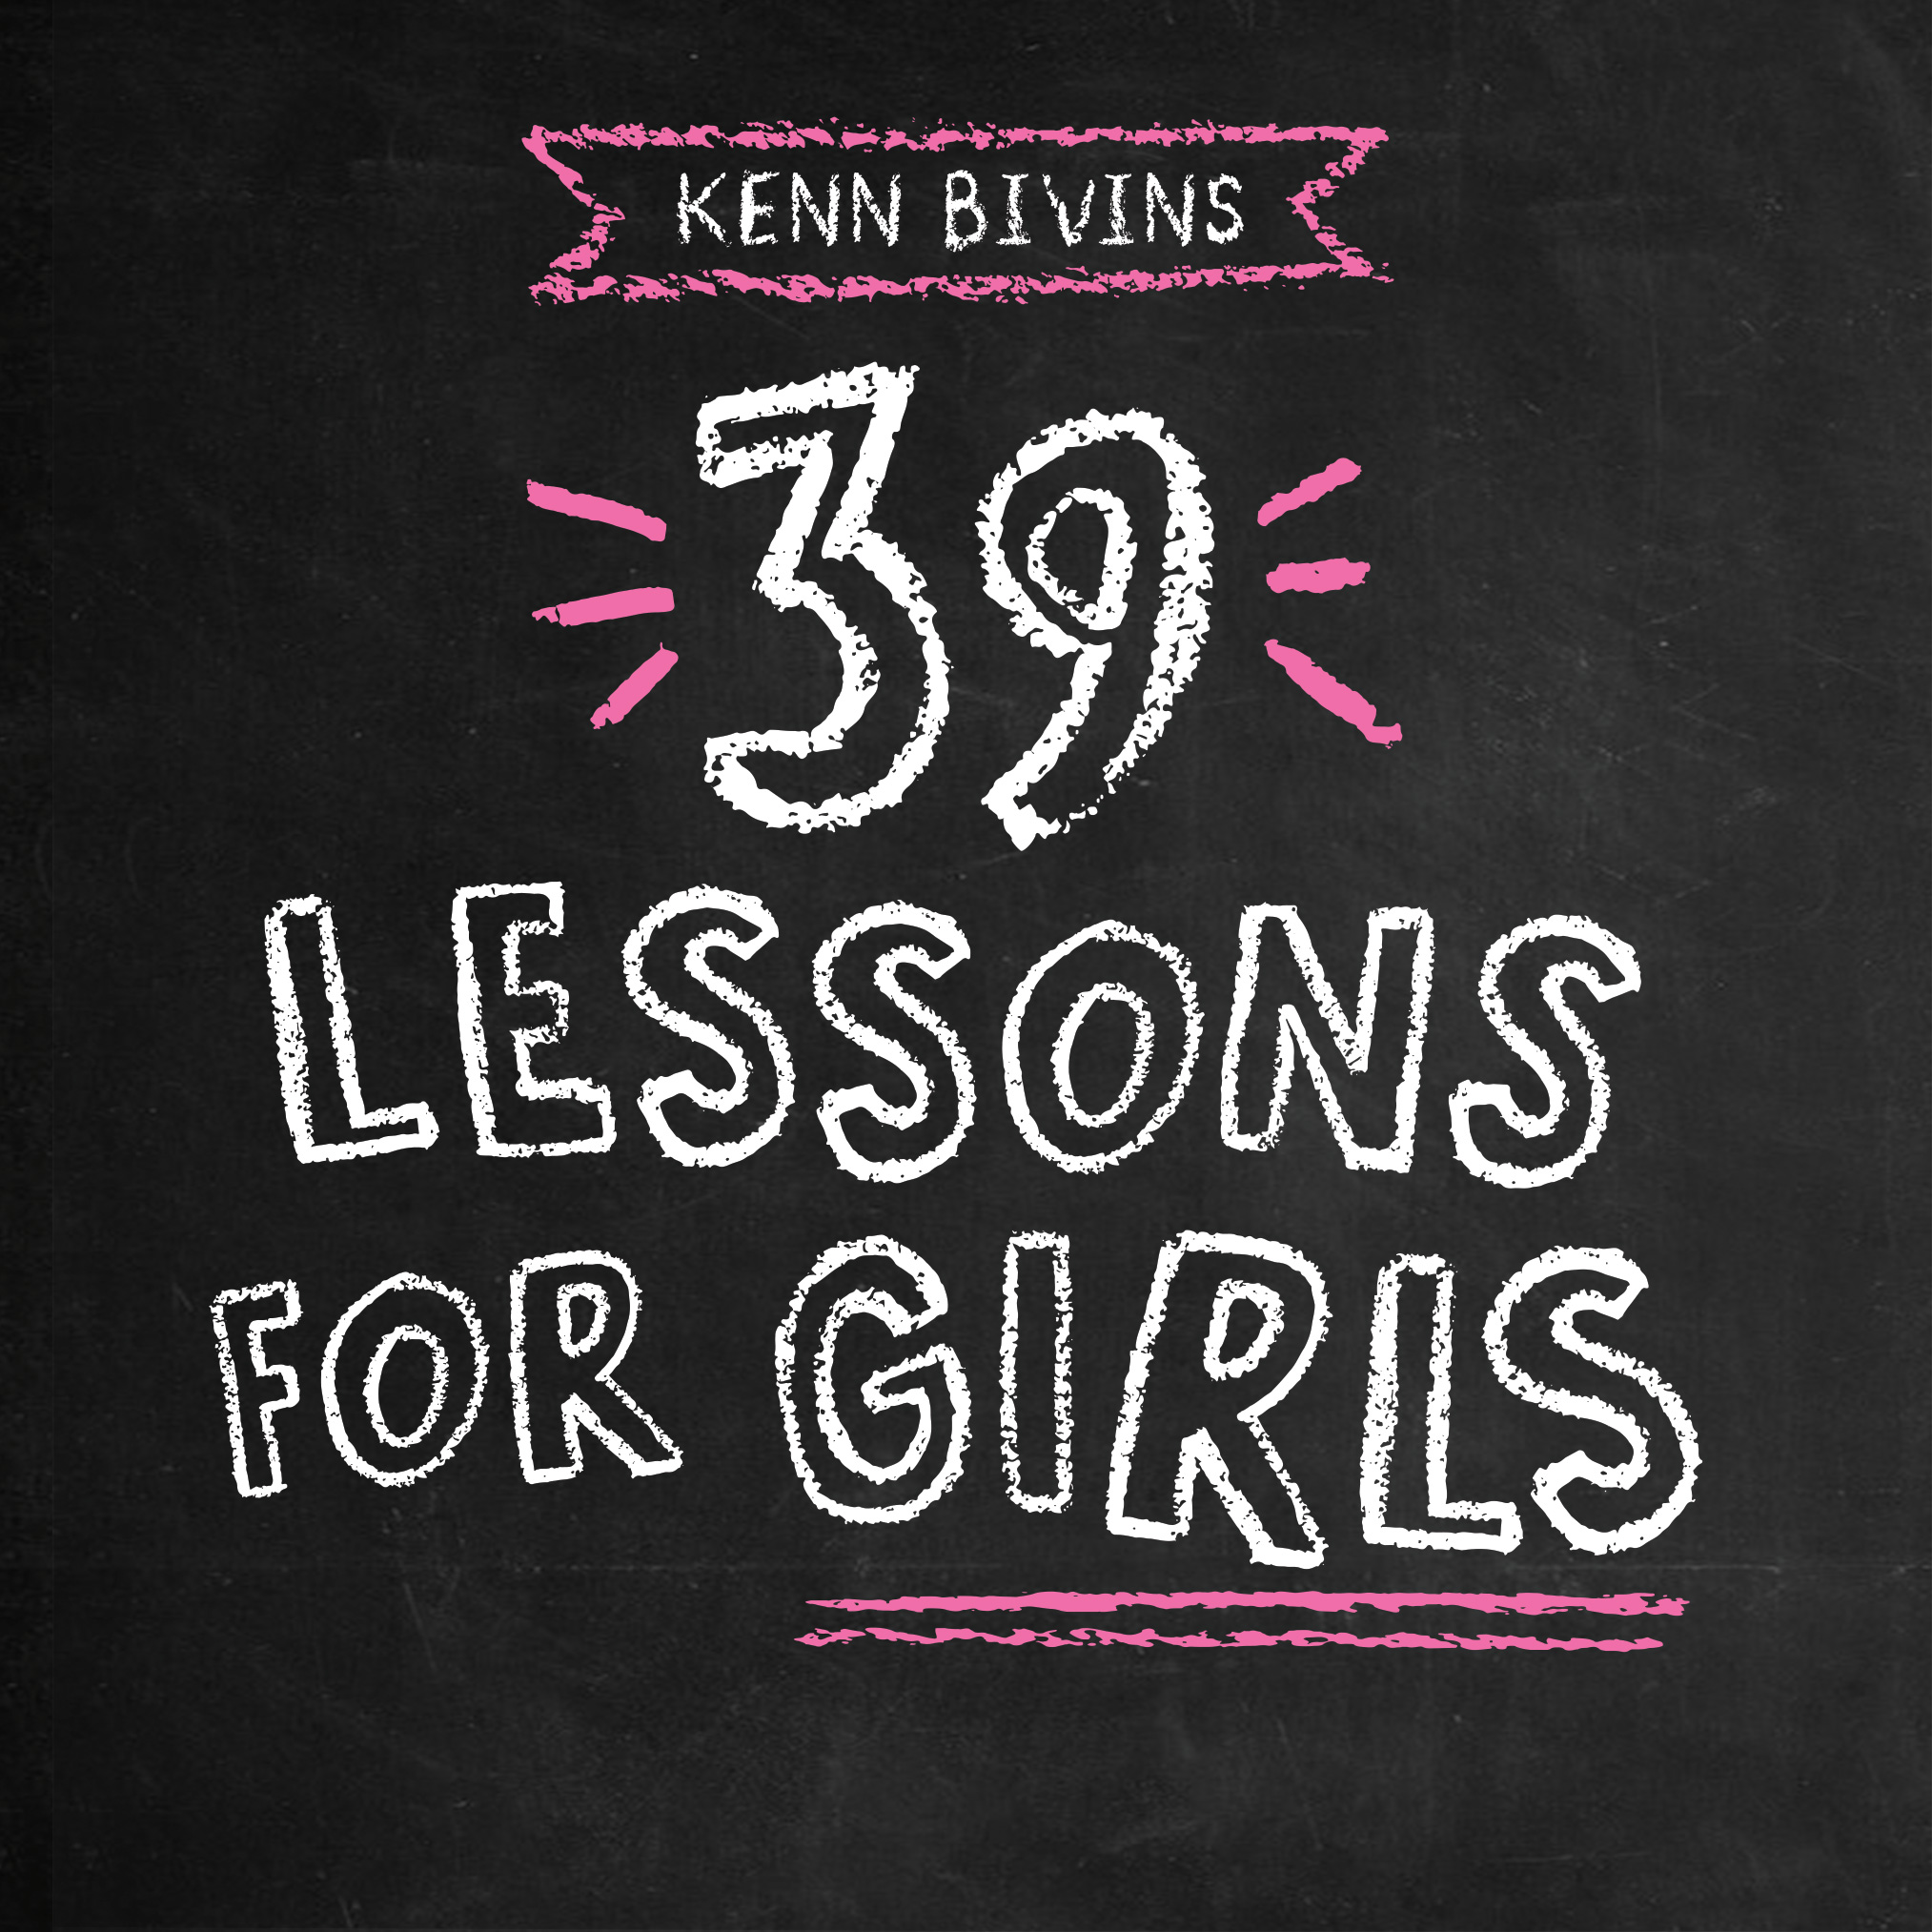 39 Lessons for Girls